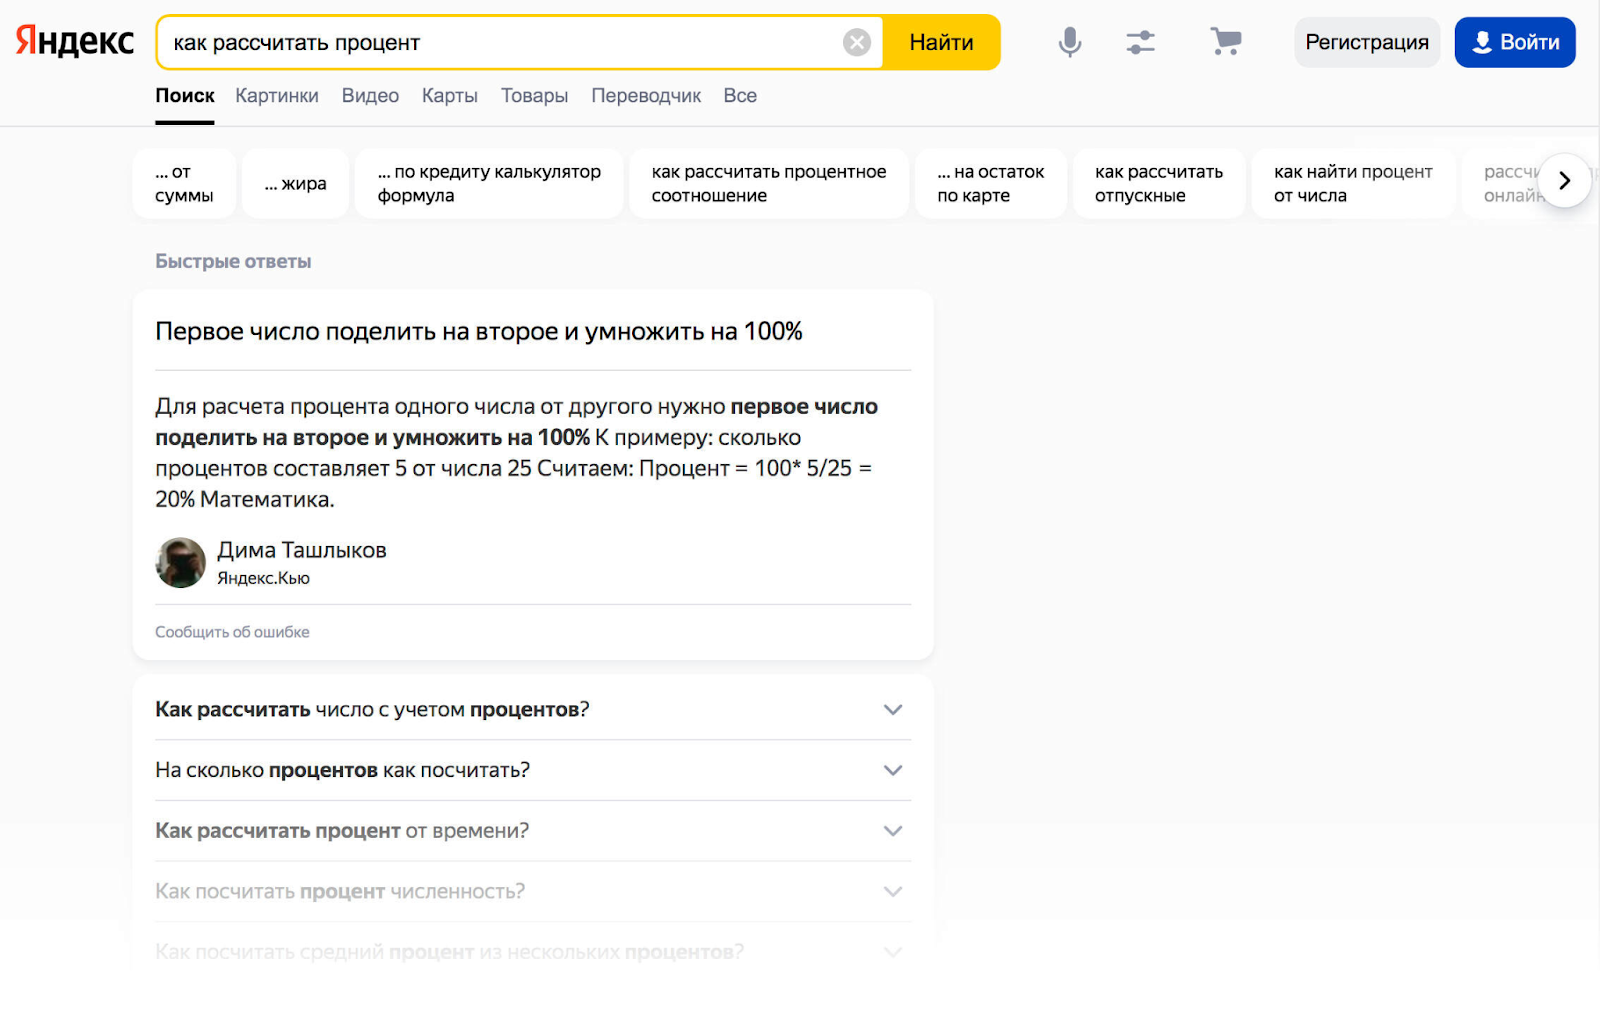 Yandex’s search results for "how to calculate percentage" in cyrillic